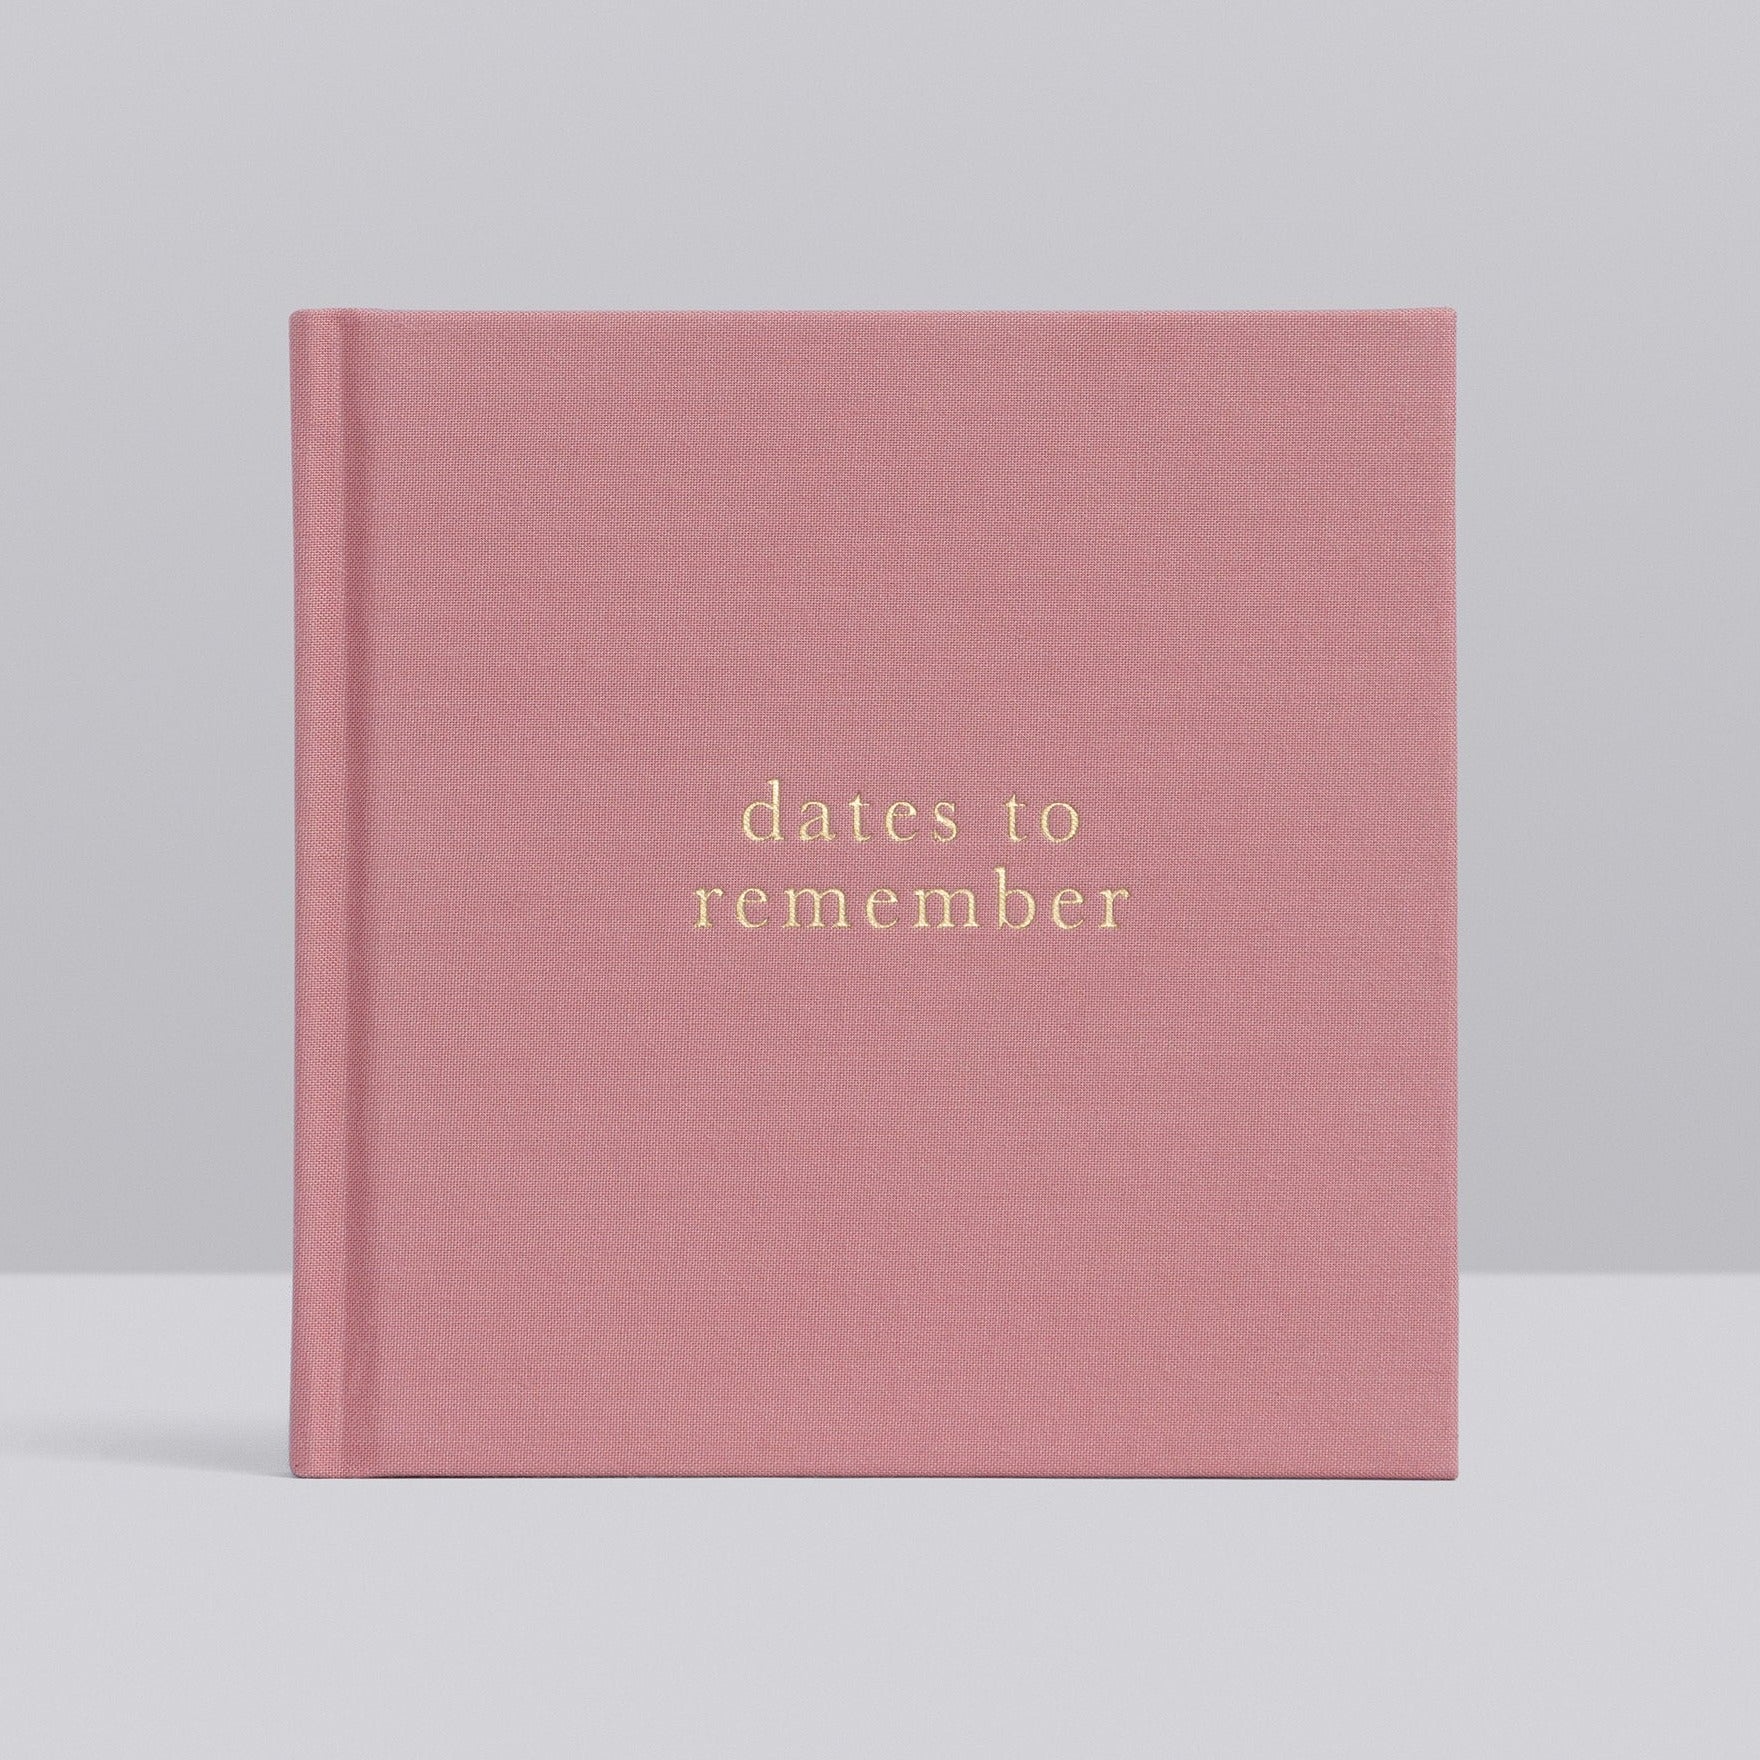 Write to Me | Dates to Remember Journal - Blush